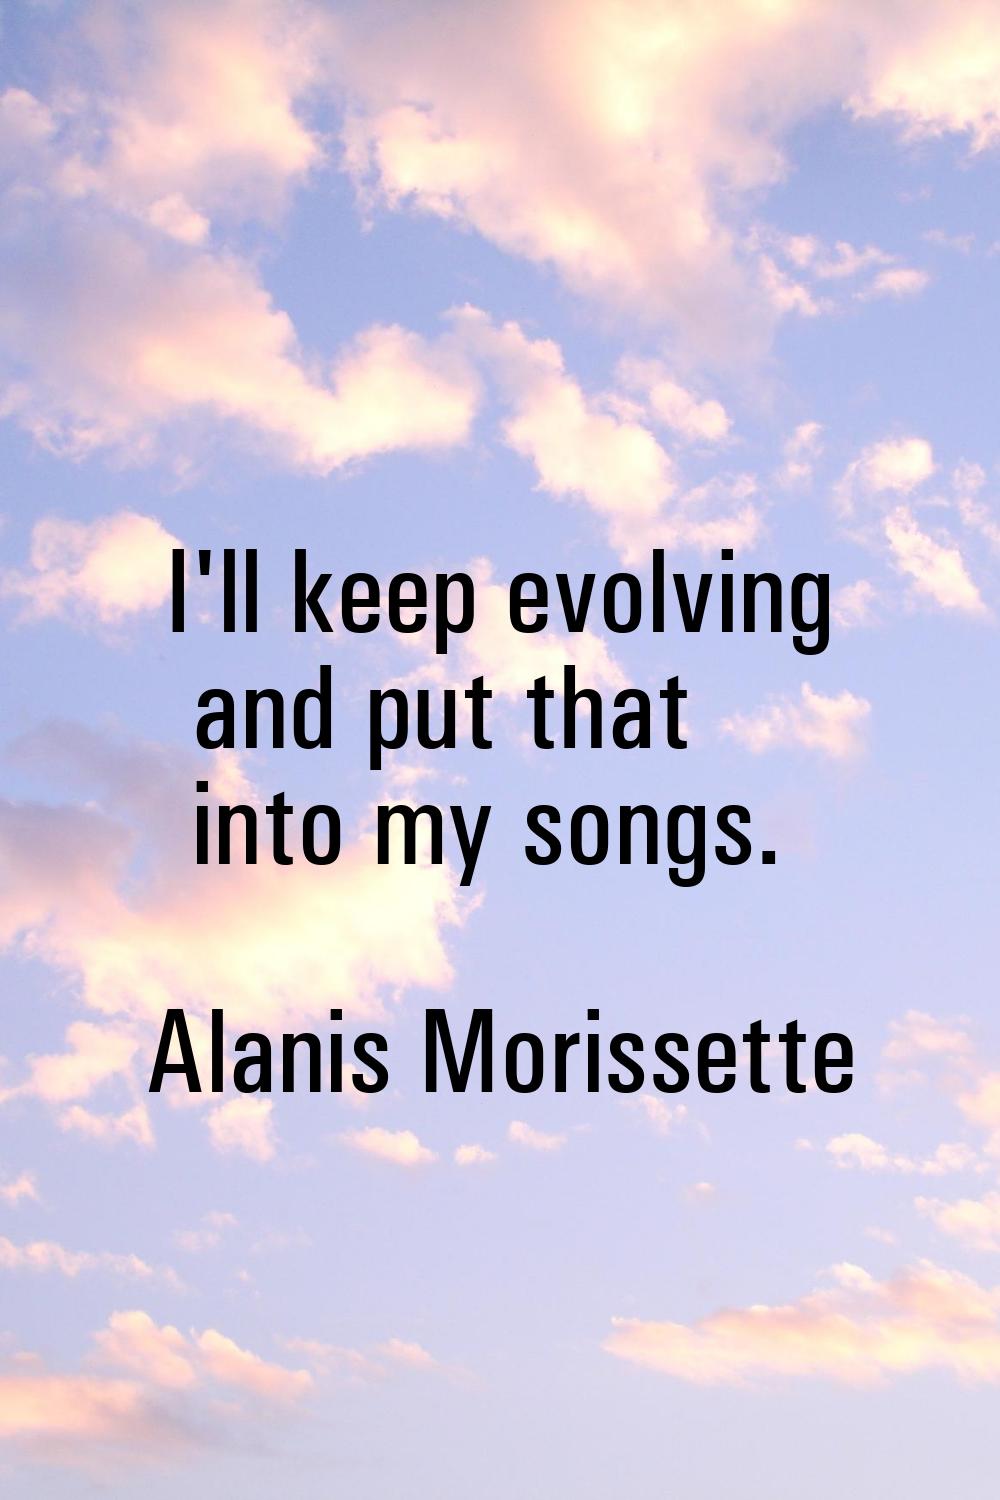 I'll keep evolving and put that into my songs.